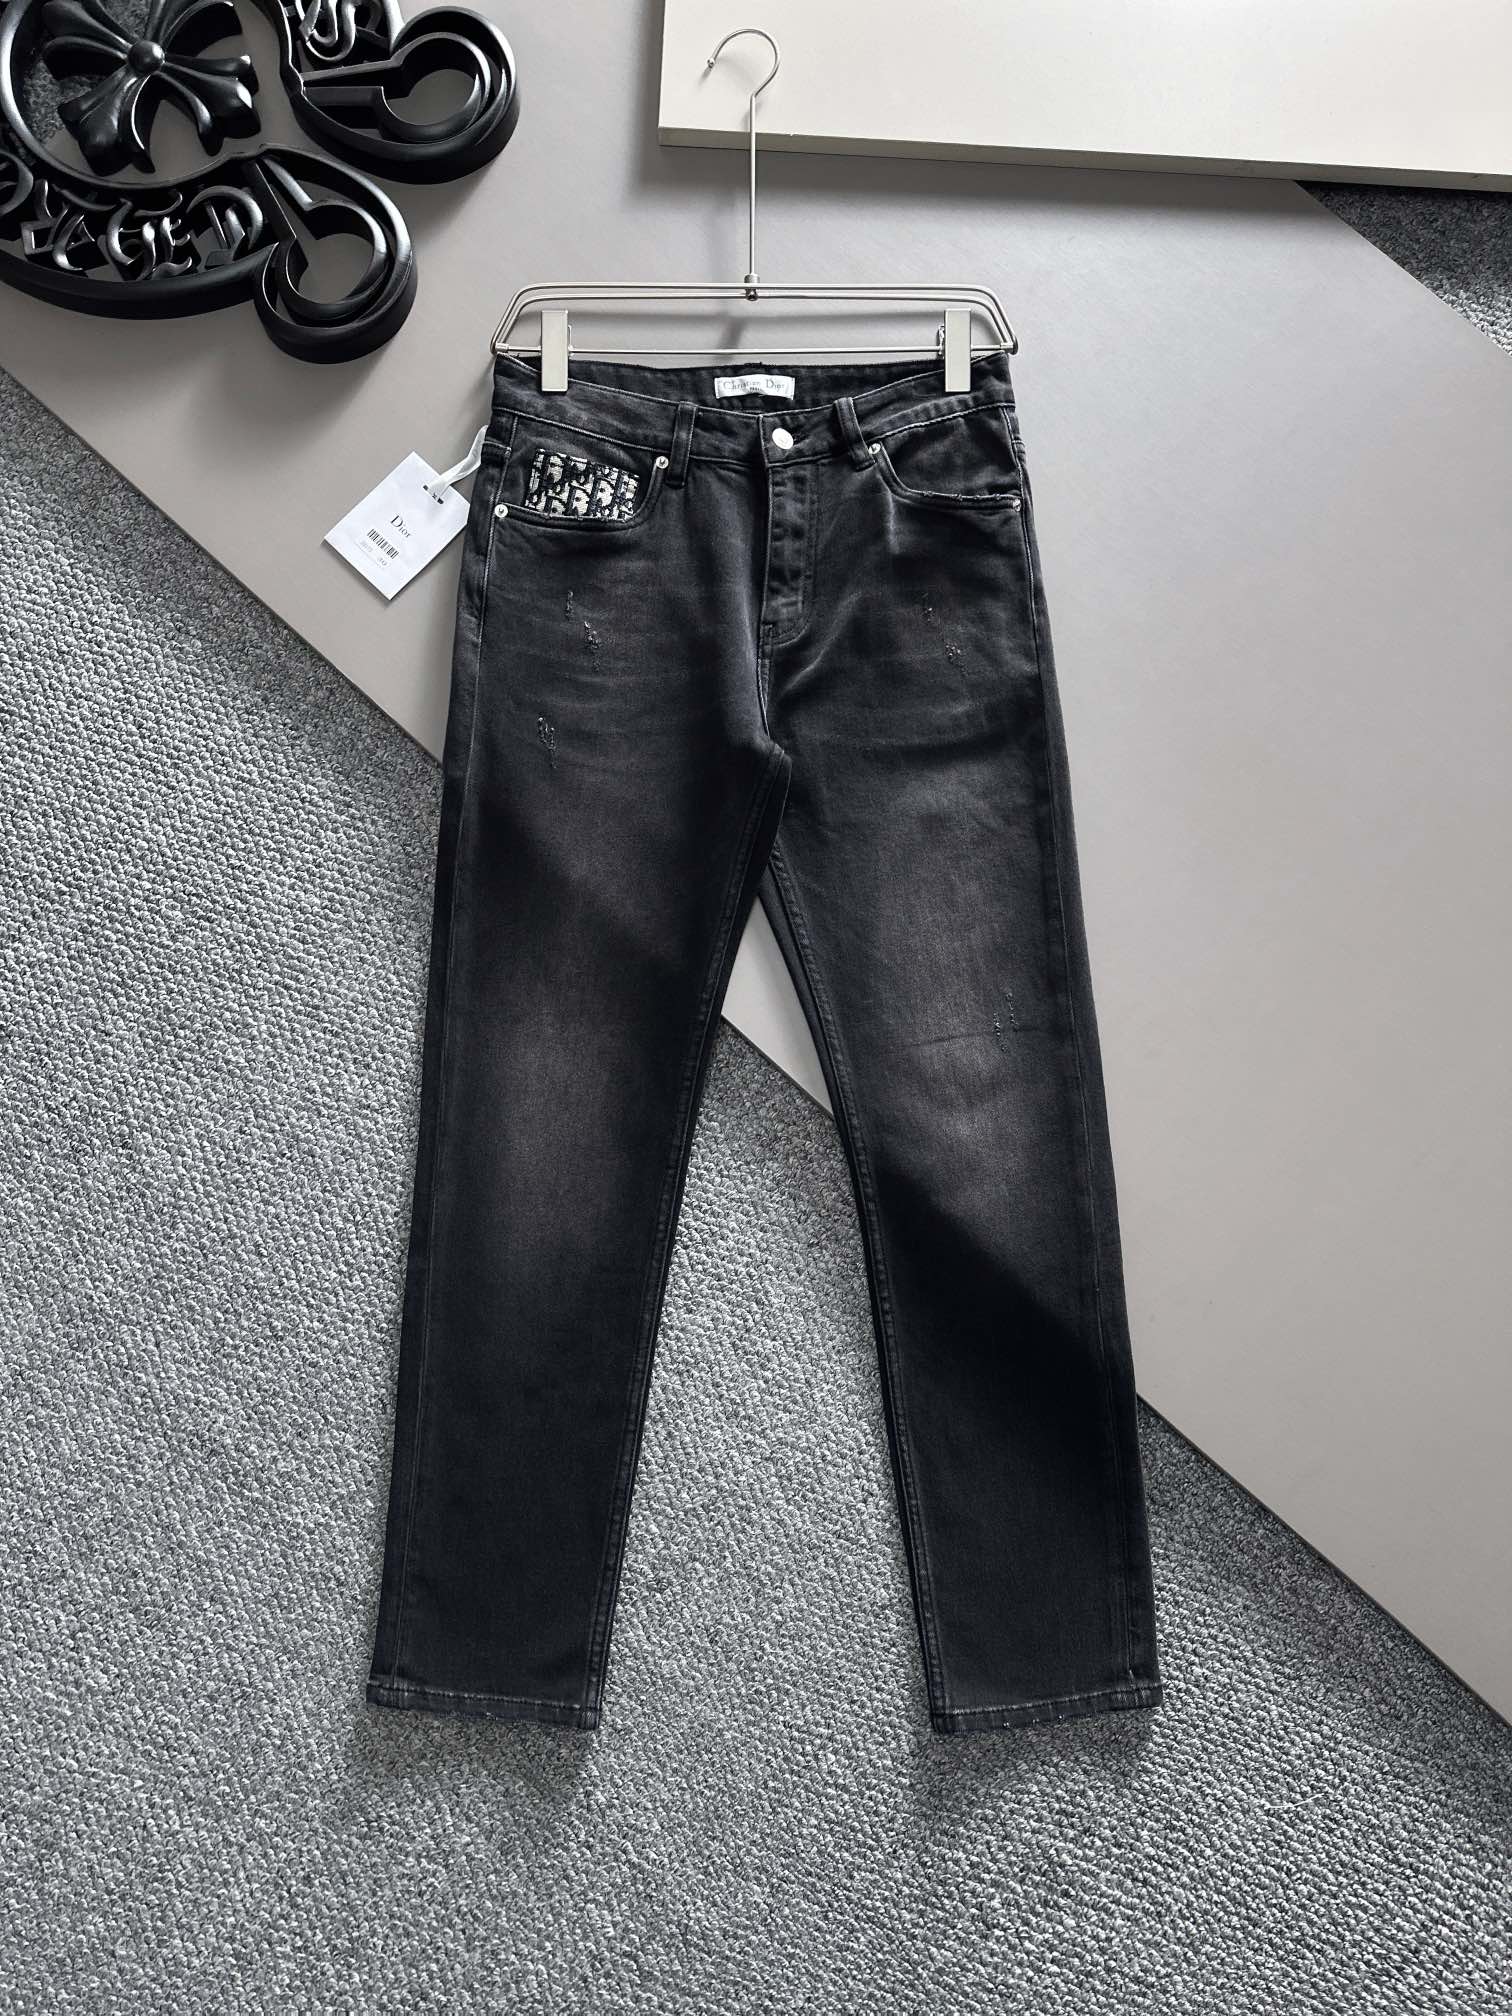 Dior Clothing Jeans Men Cotton Fall/Winter Collection Casual